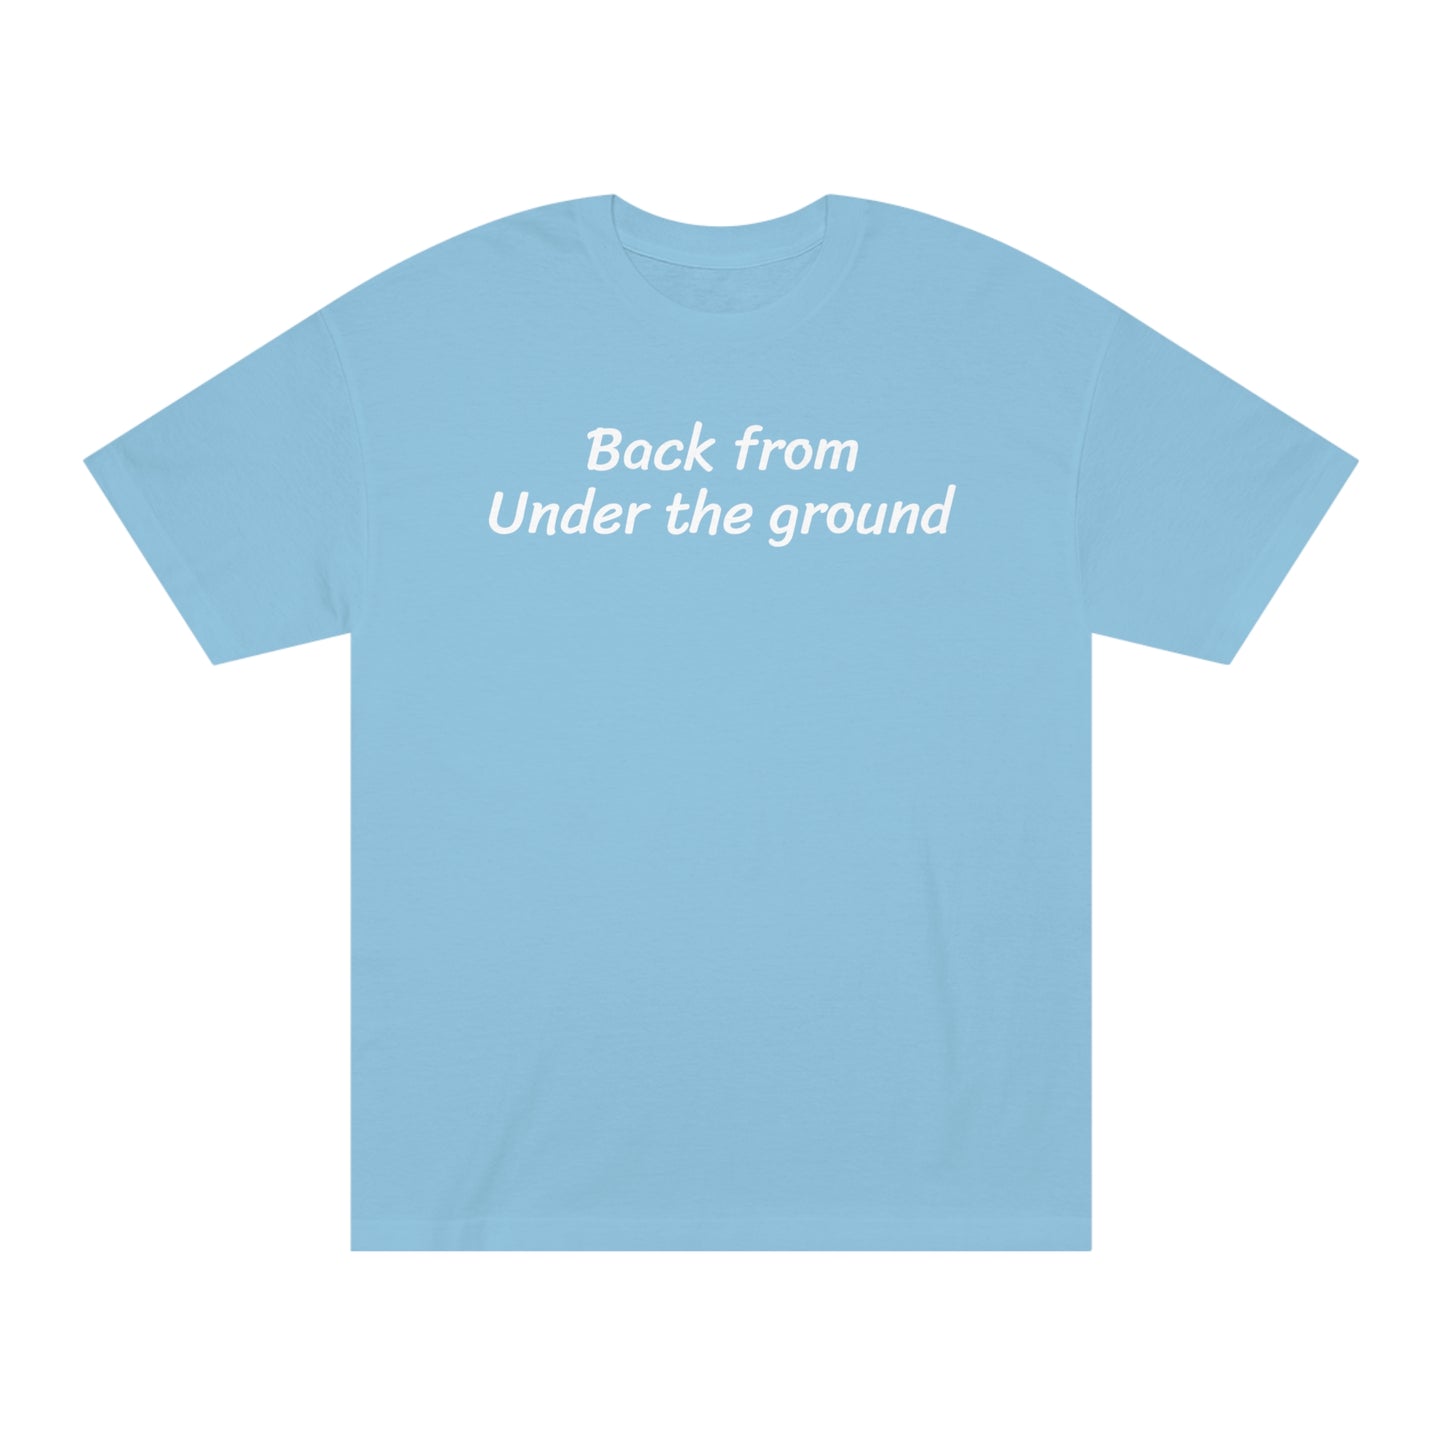 Classic Tee Back from under the ground